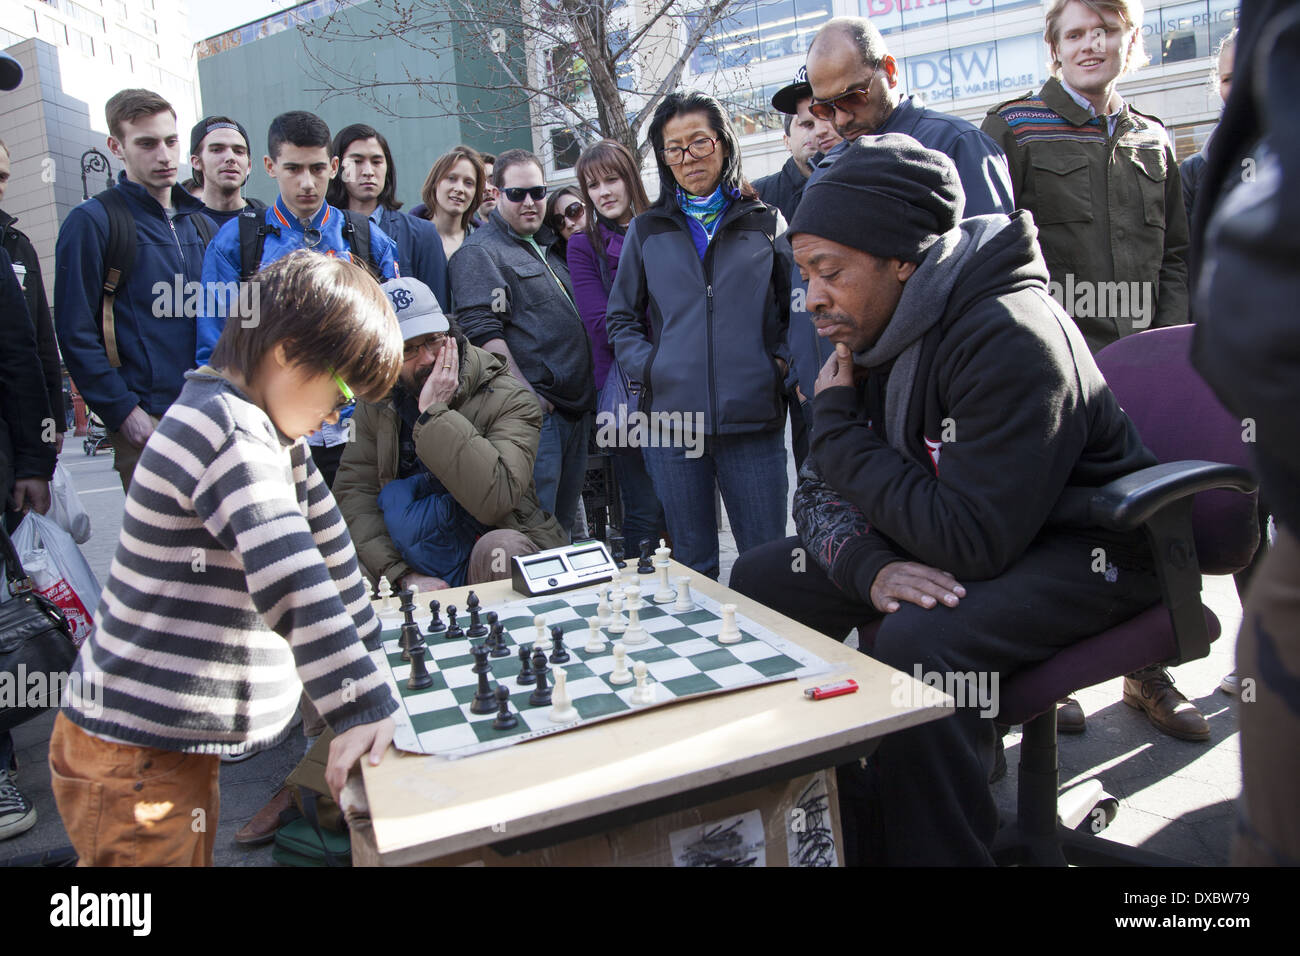 Young prodigy chess player takes on the big boys at Union Square Park, NYC. Stock Photo